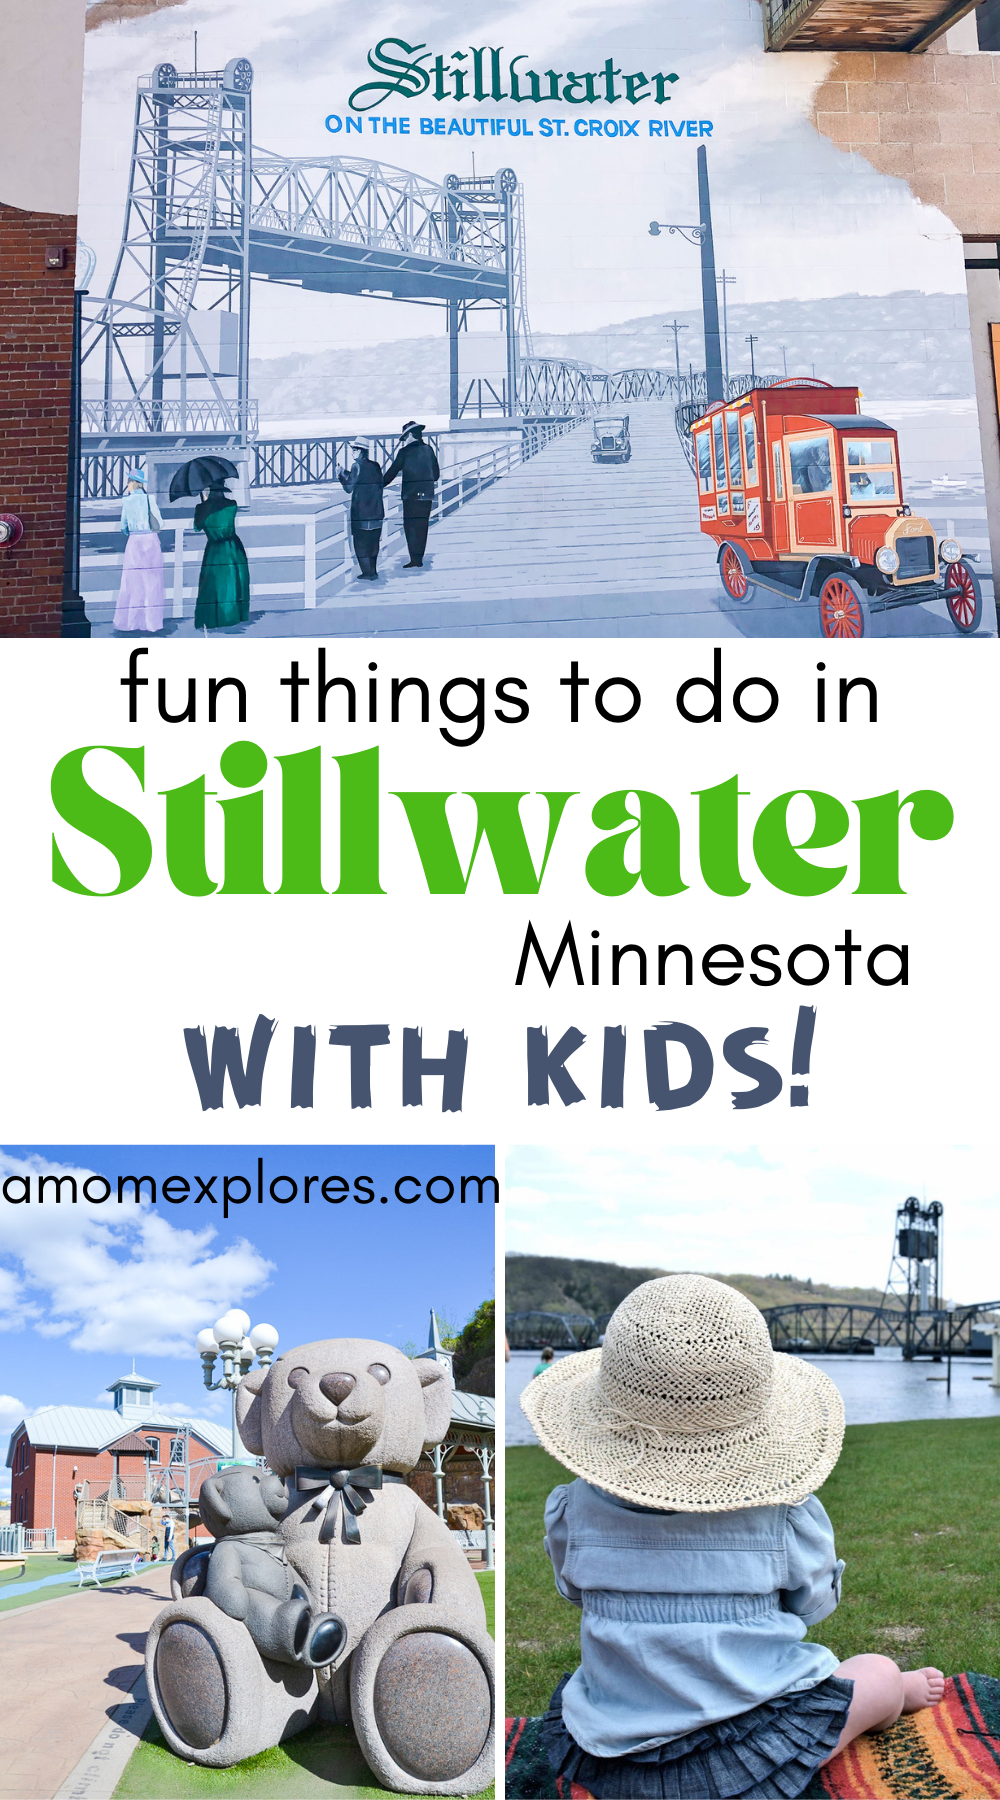 fun things to do in Stillwater Minnesota with kids.png